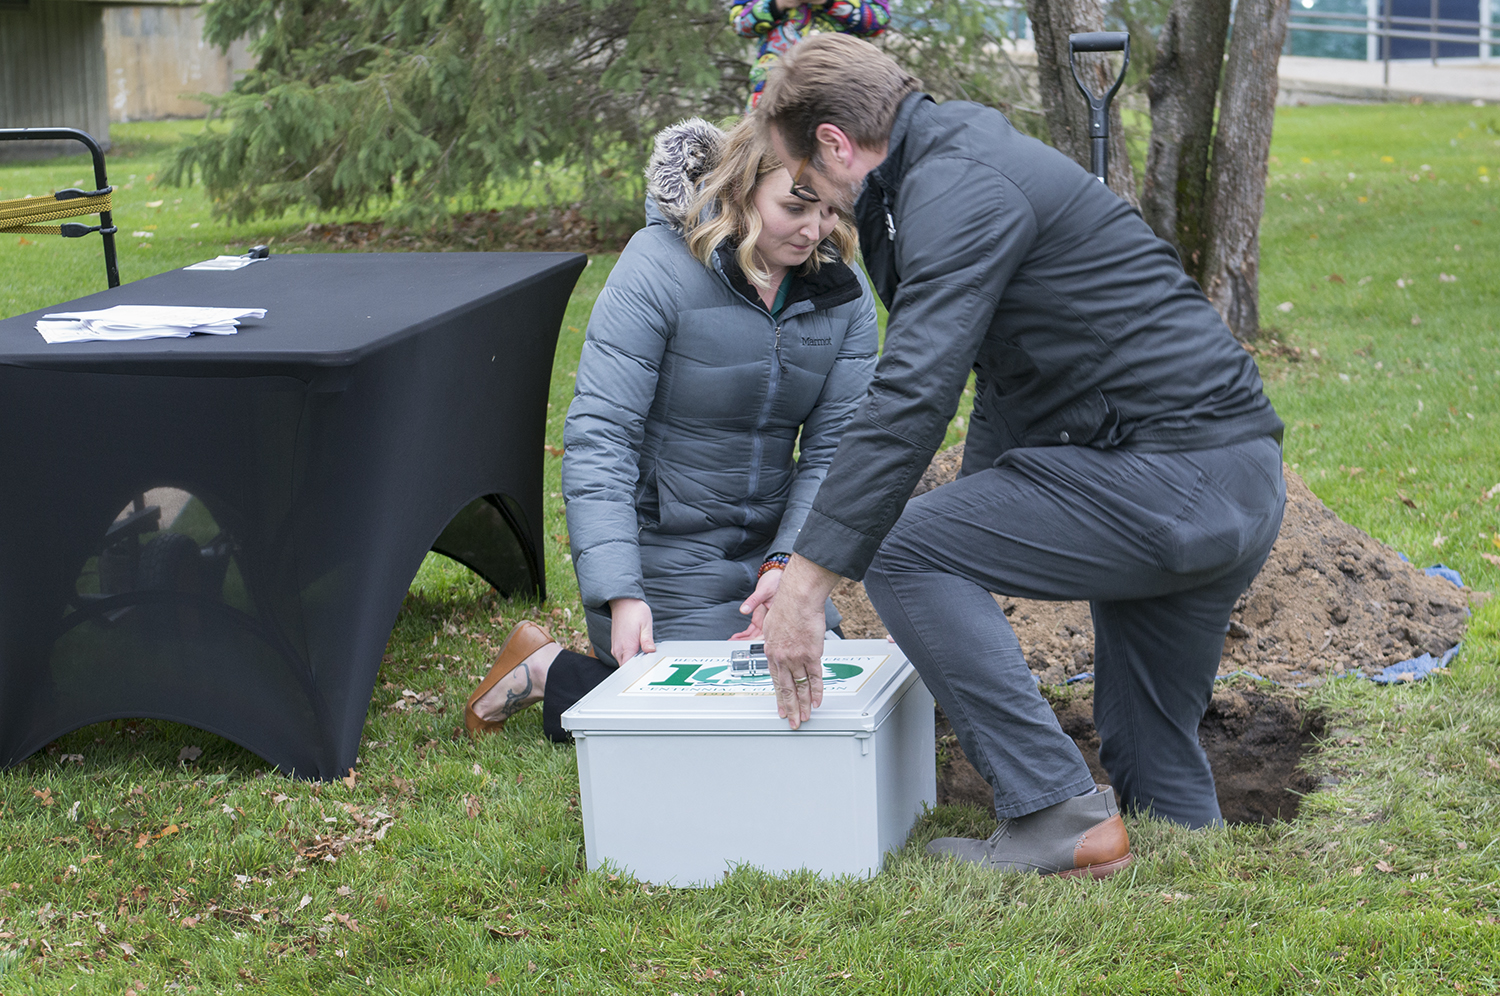 One of BSU’s last formal events during its Bemidji State Century celebration came in September 2019, when it planted a time capsule intended to be opened by future caretakers of Bemidji State University.